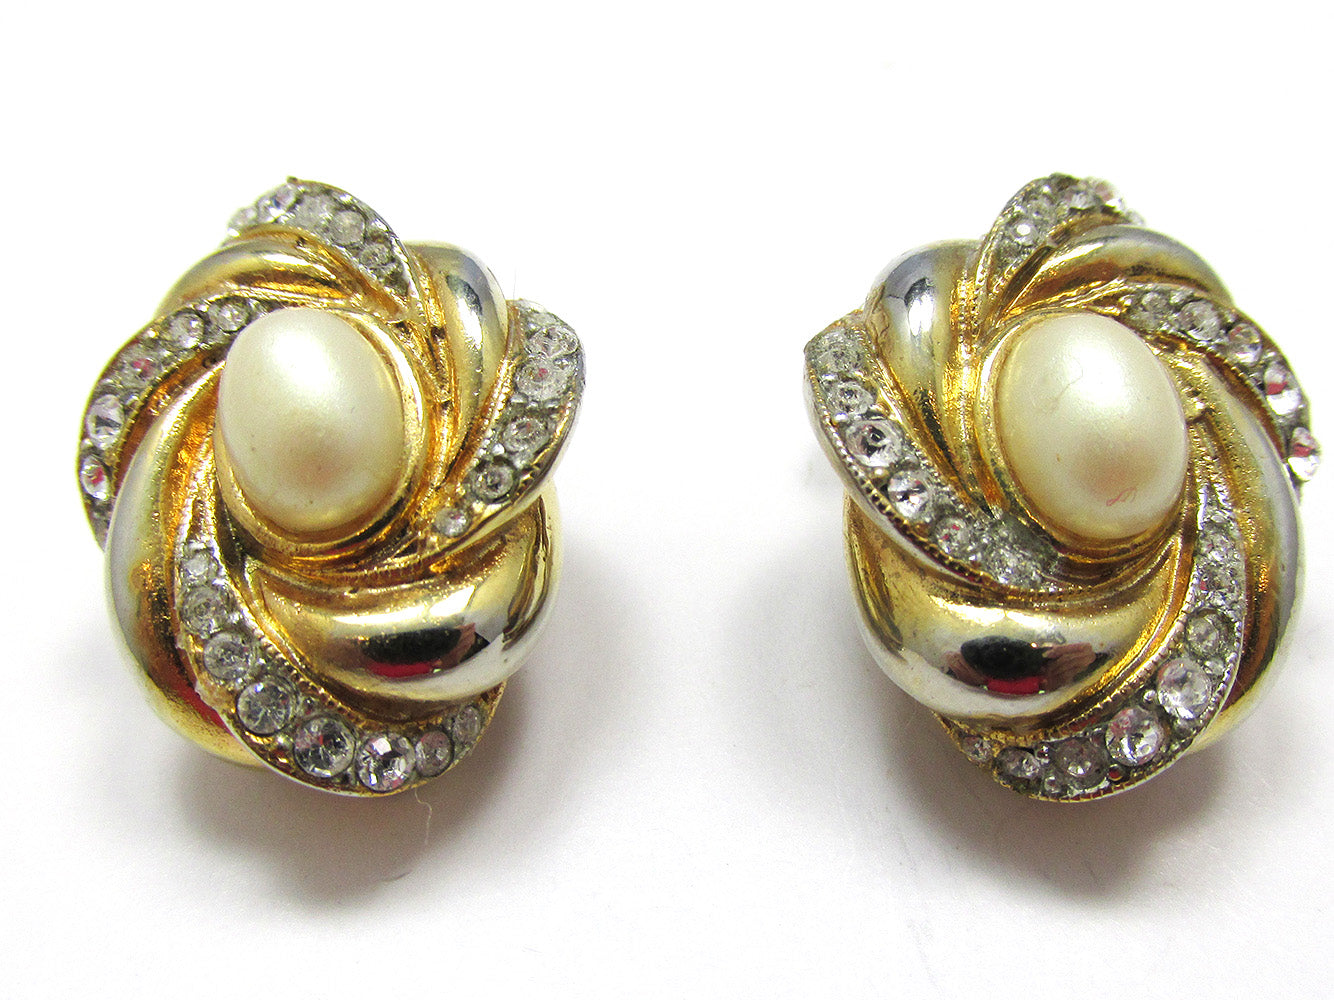 Sensational 1960s Vintage Pearl Cabochon and Diamante Earrings - Front